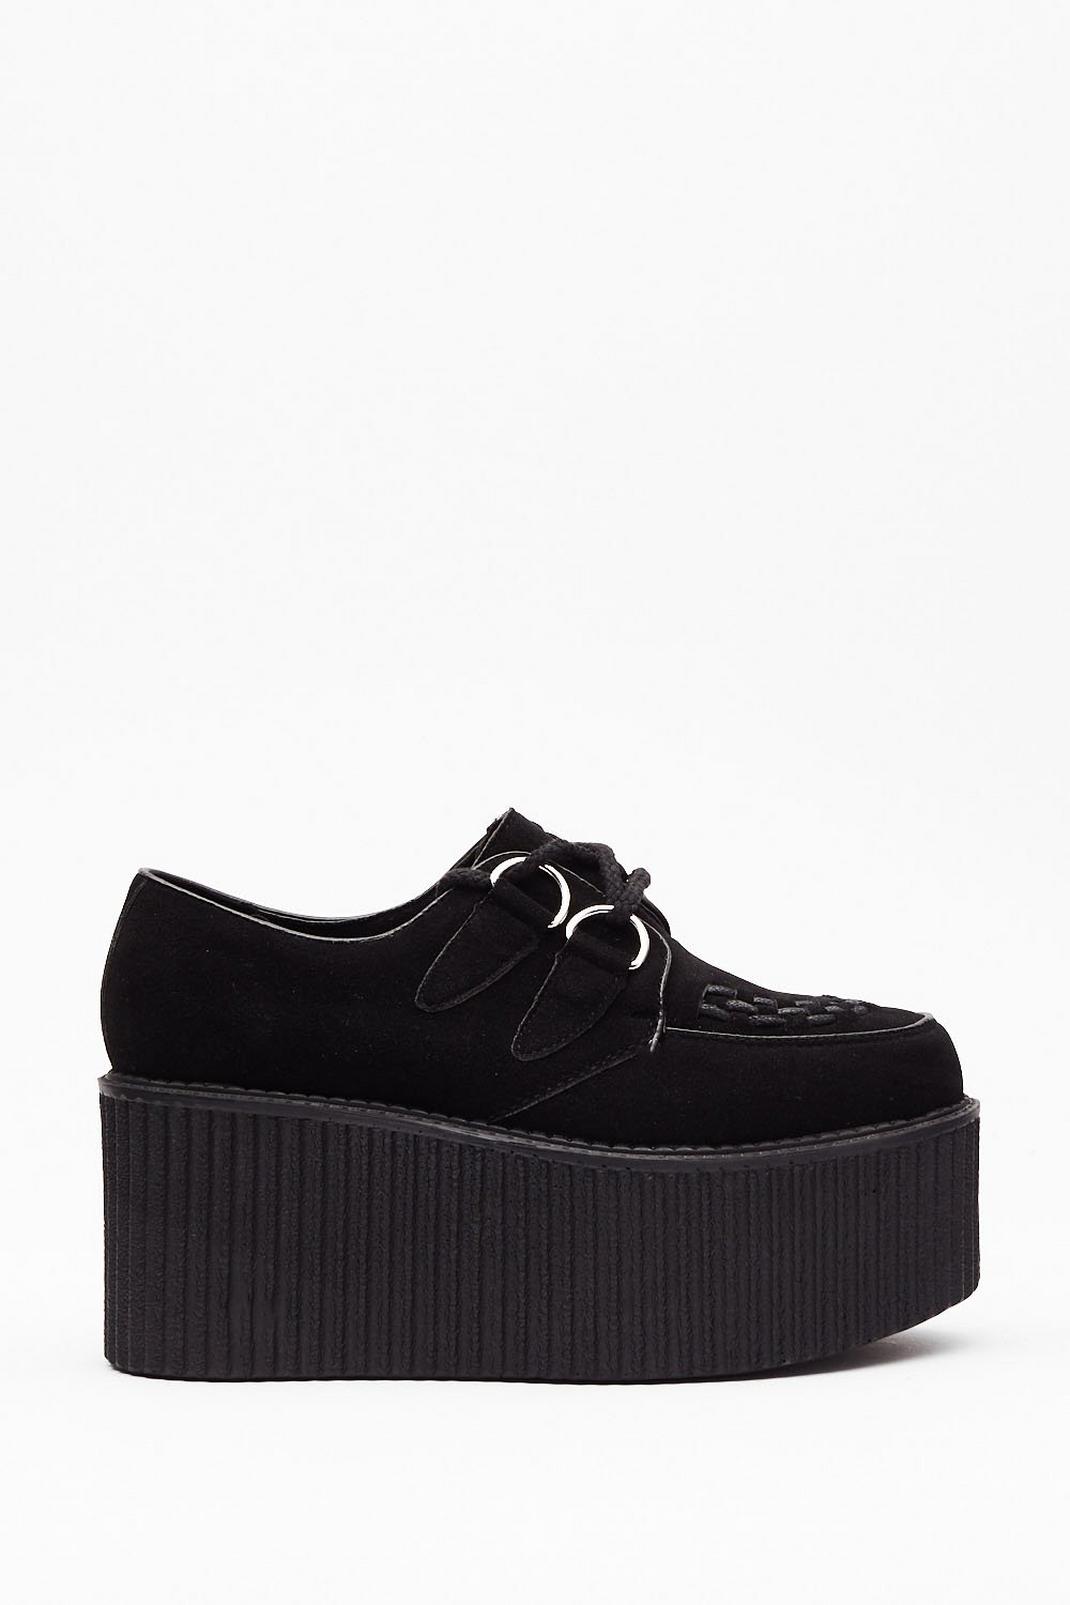 Creepin' Up On Me Faux Suede Platform Shoes | Nasty Gal